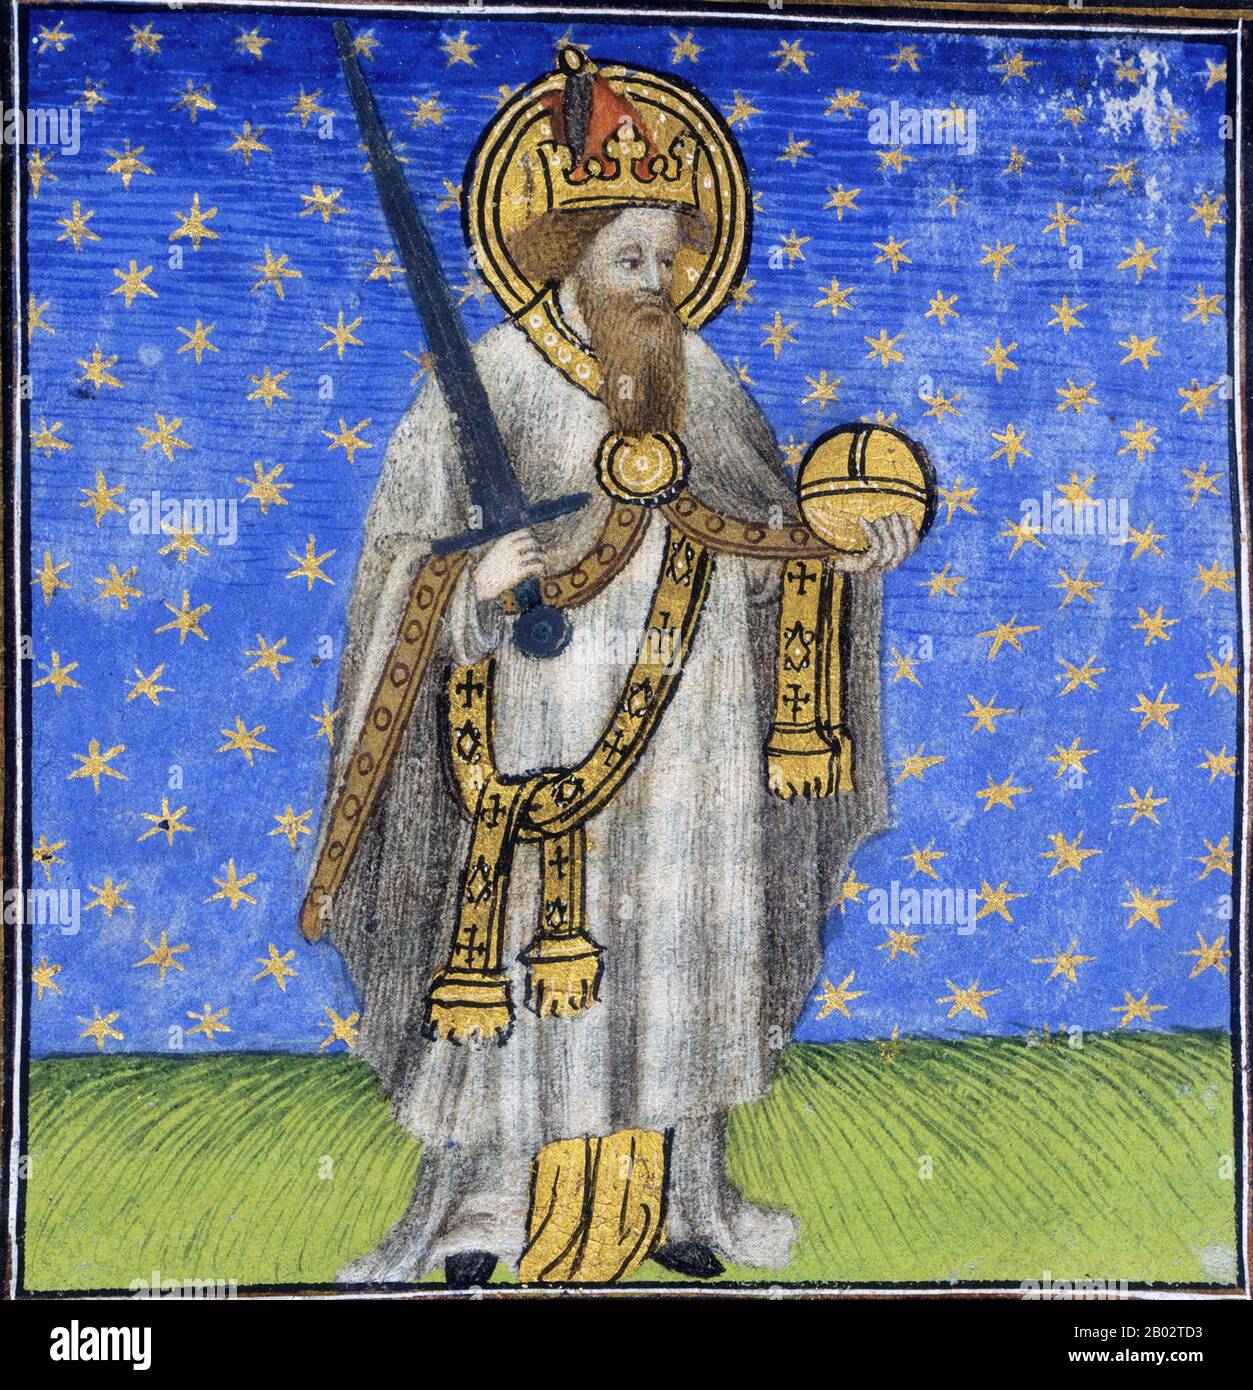 Charlemagne (2 April 742 – 28 January 814 CE), also known as Charles the Great (Latin: Carolus or Karolus Magnus, French: Charles Le Grand or Charlemagne, German: Karl der Grosse, Italian: Carlo Magno or Carlomagno) or Charles I, was King of the Franks who united most of Western Europe during the Middle Ages and laid the foundations for modern France and Germany. He took the Frankish throne from 768 and became King of Italy from 774. From 800 he became the first Holy Roman Emperor - the first recognized Roman emperor in Western Europe since the collapse of the Western Roman Empire three centur Stock Photo